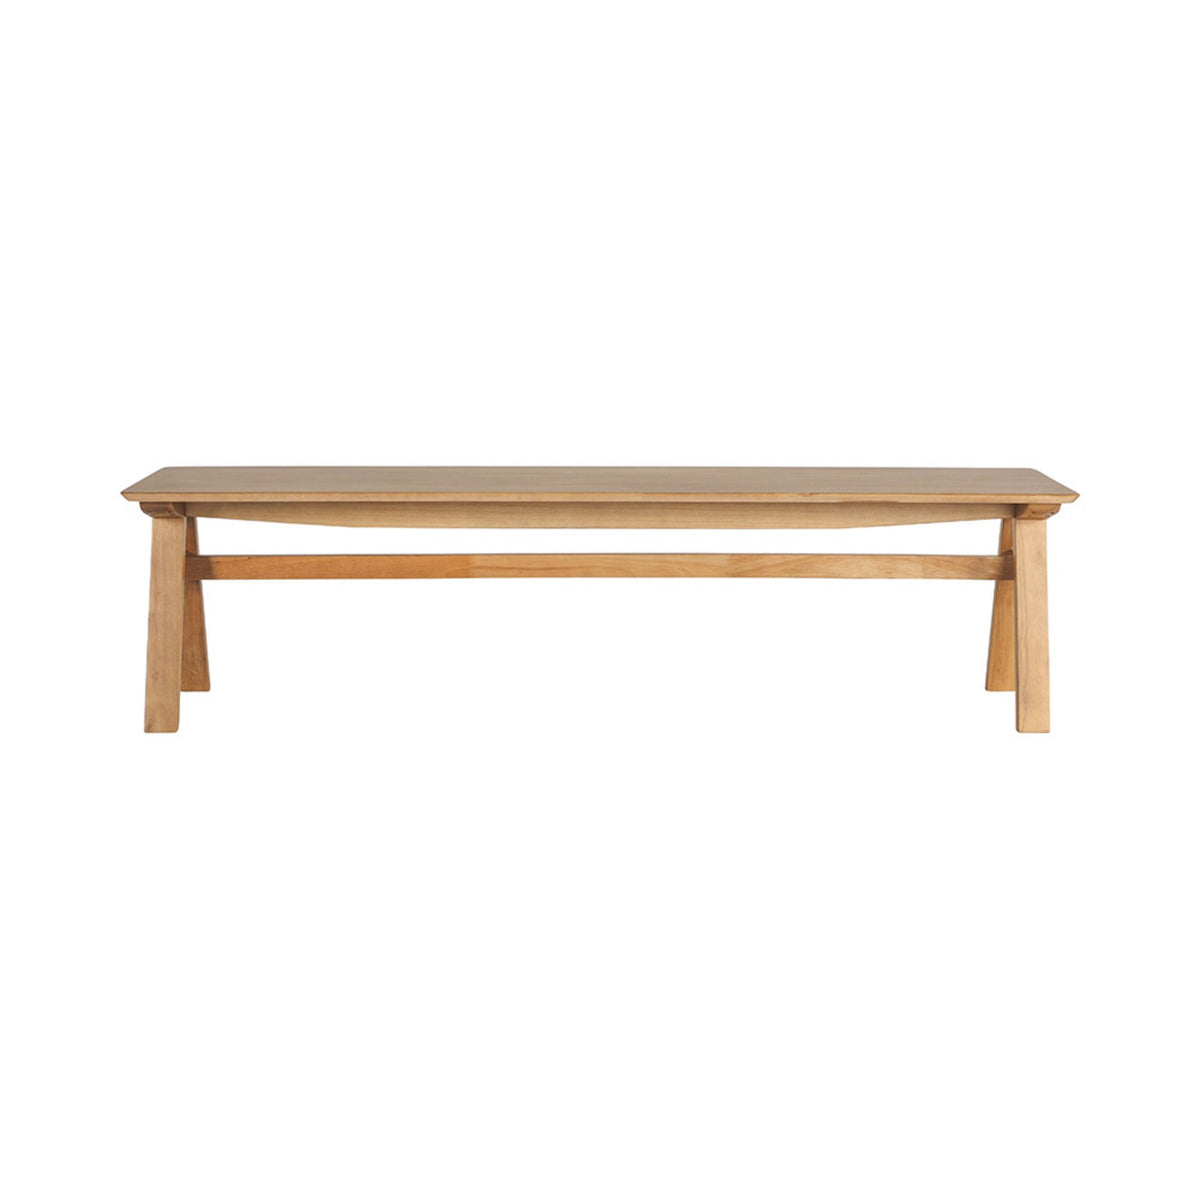 Holly Dining Bench Seat 170cm – Early Settler AU